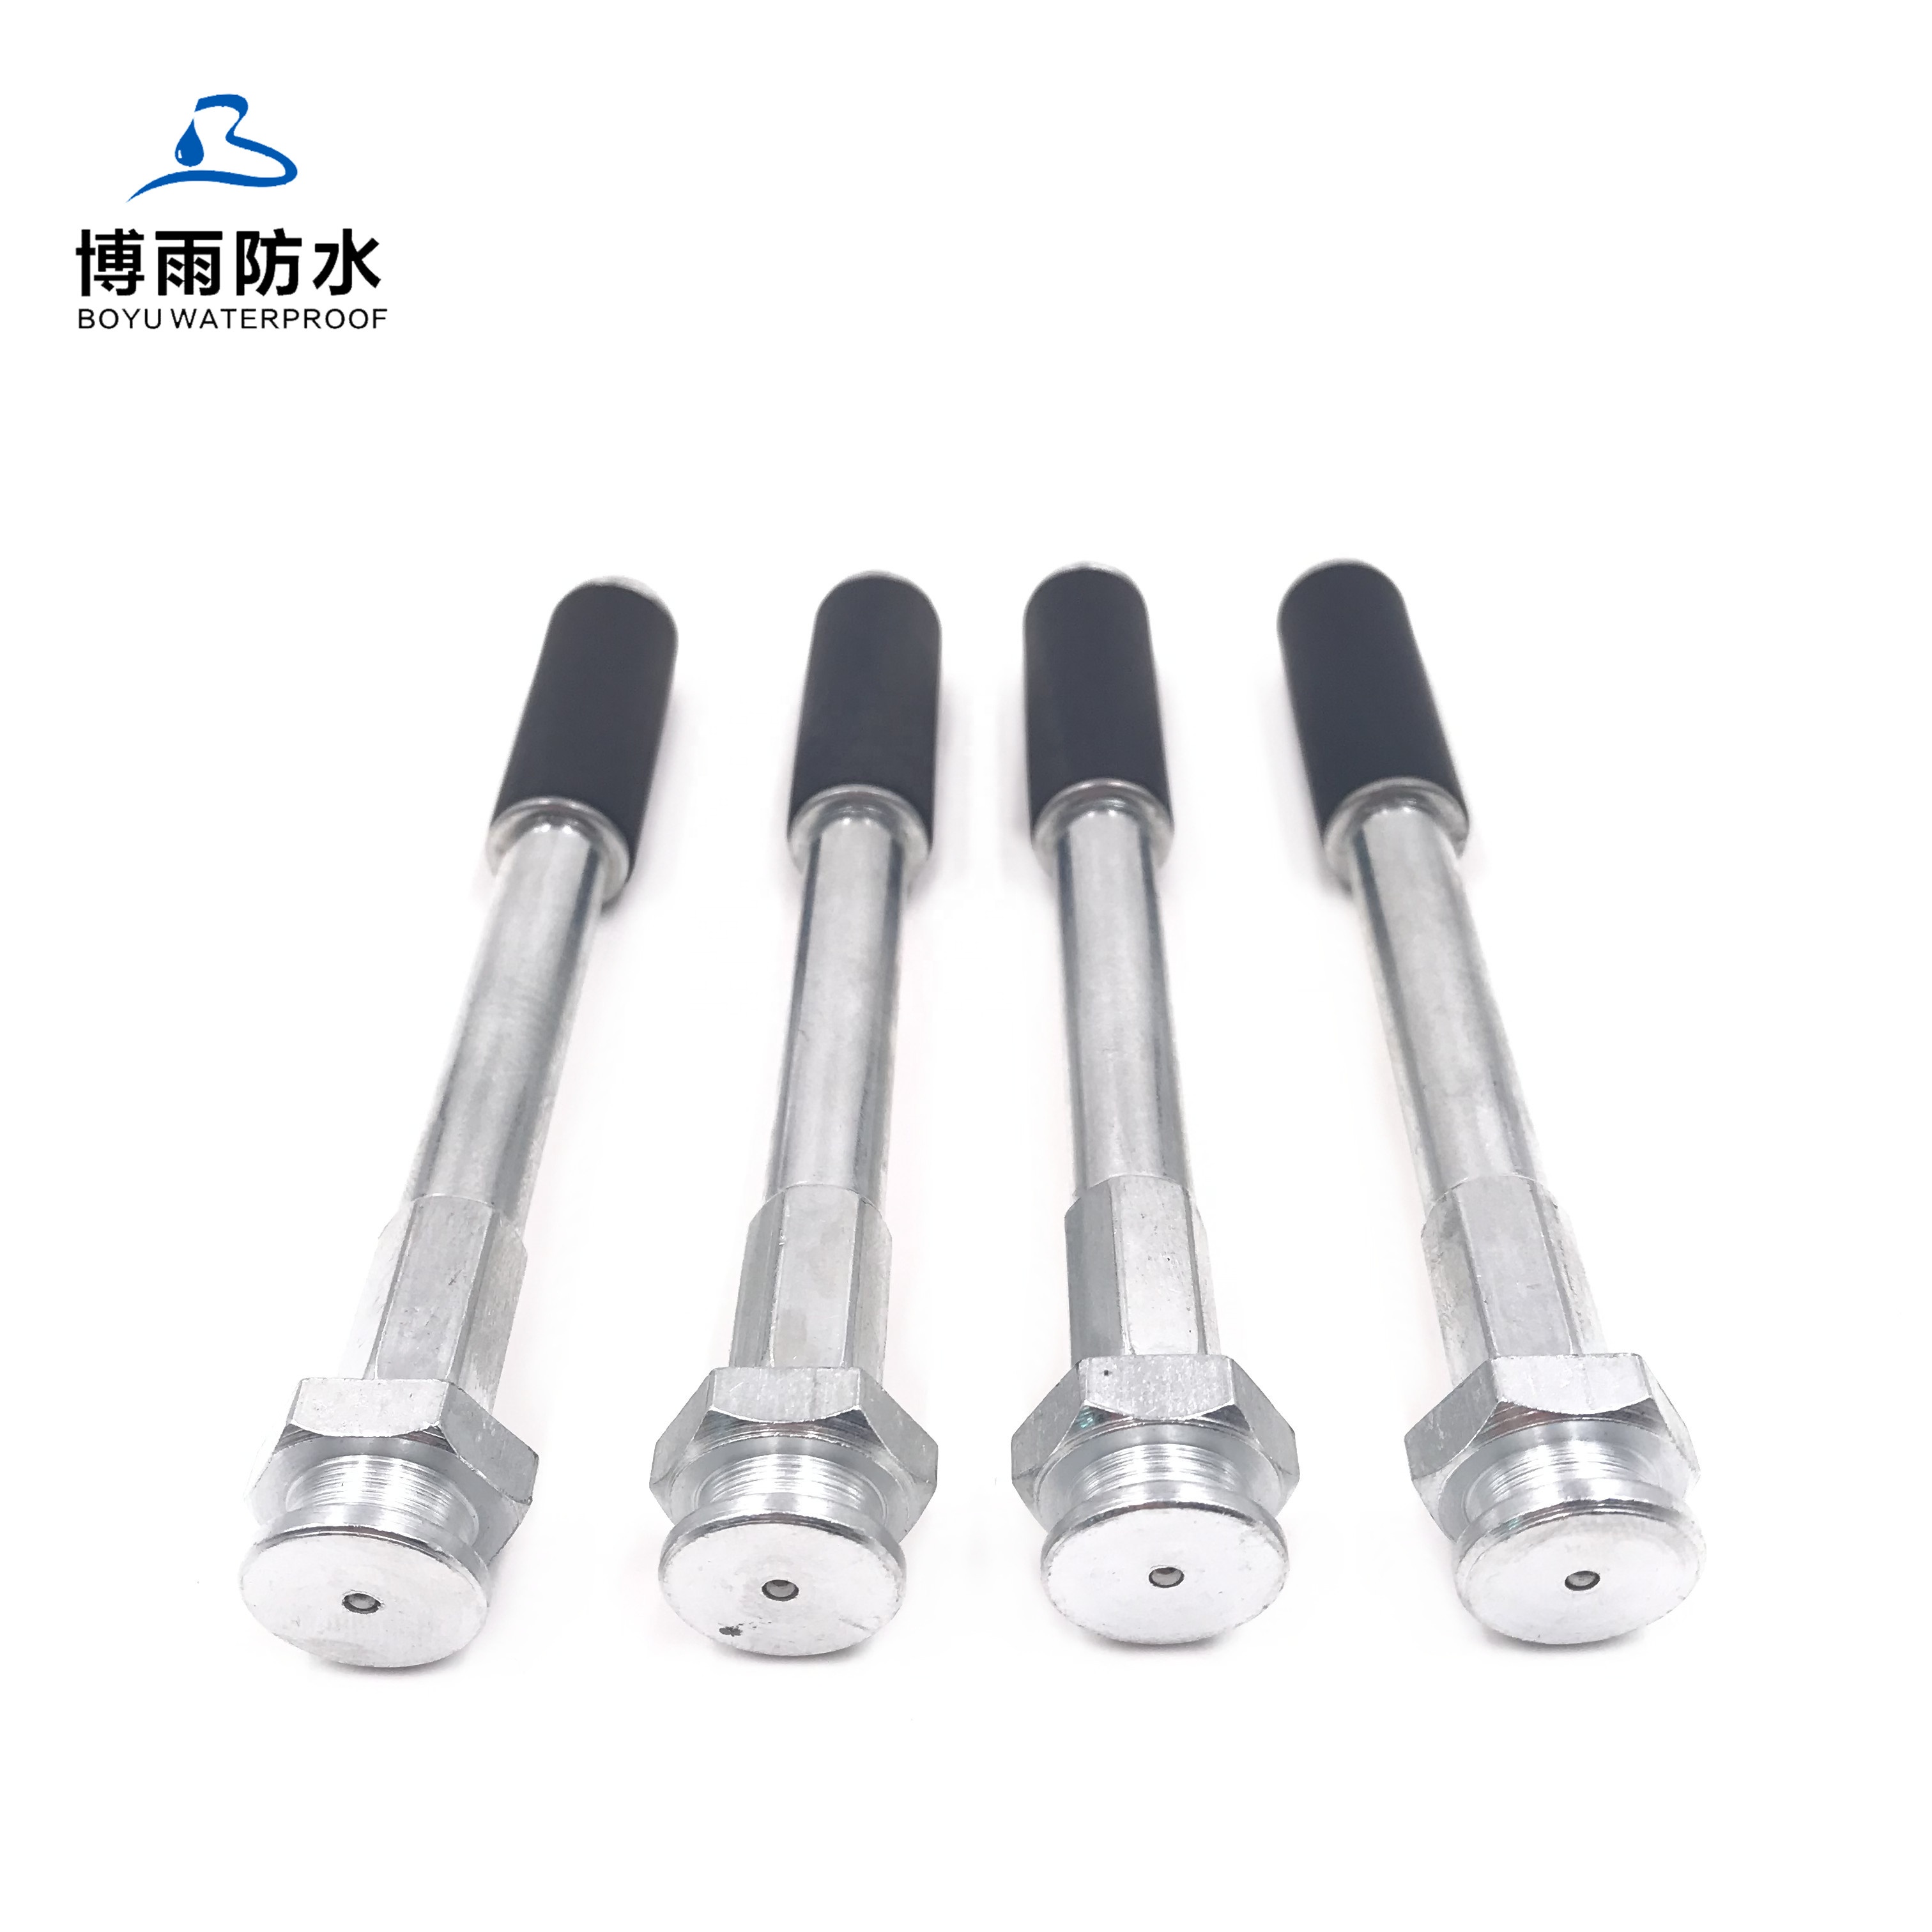 China New Product Grouting Aluminum Injection Packer - Flat Head nipple M6 Injection Packers steel 13*100mm China factory customize design – Boyu